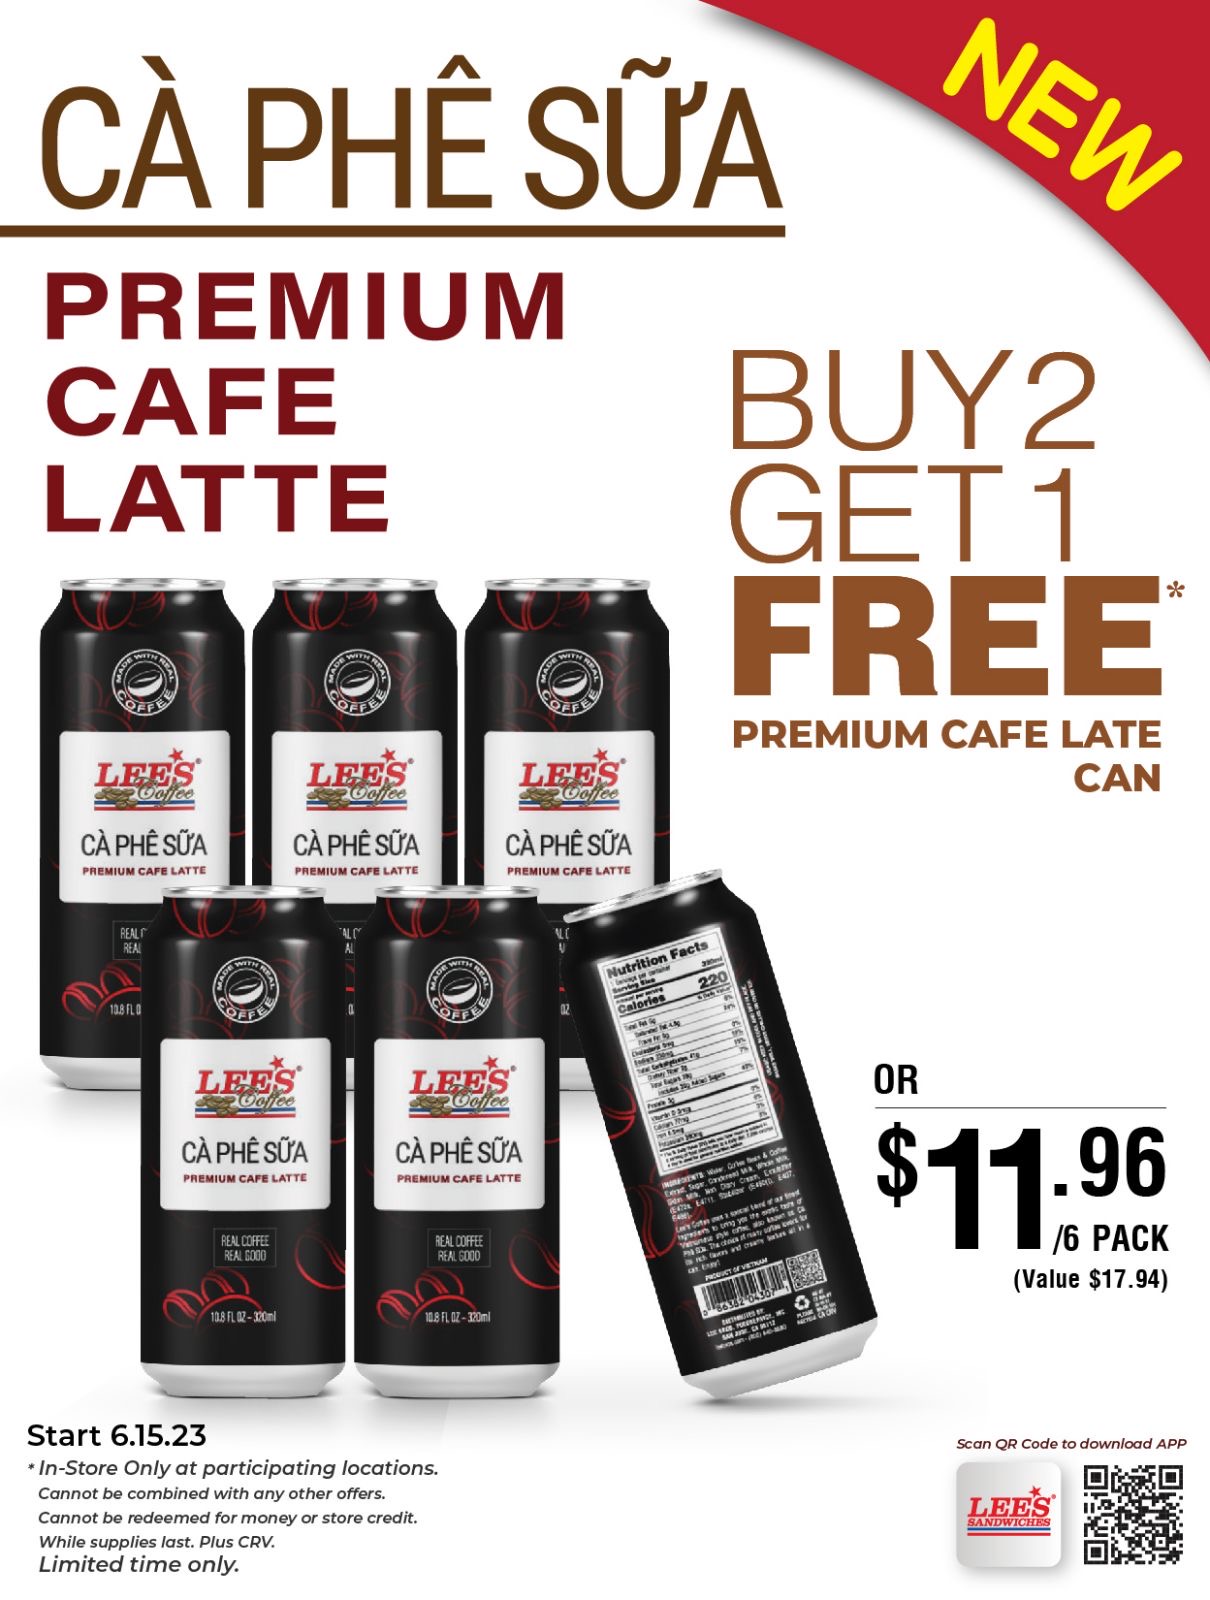 B2G1 Free Lee's Coffee Can or Buy Pack of 6 with only $11.96. Only in-store order from 6/15/23